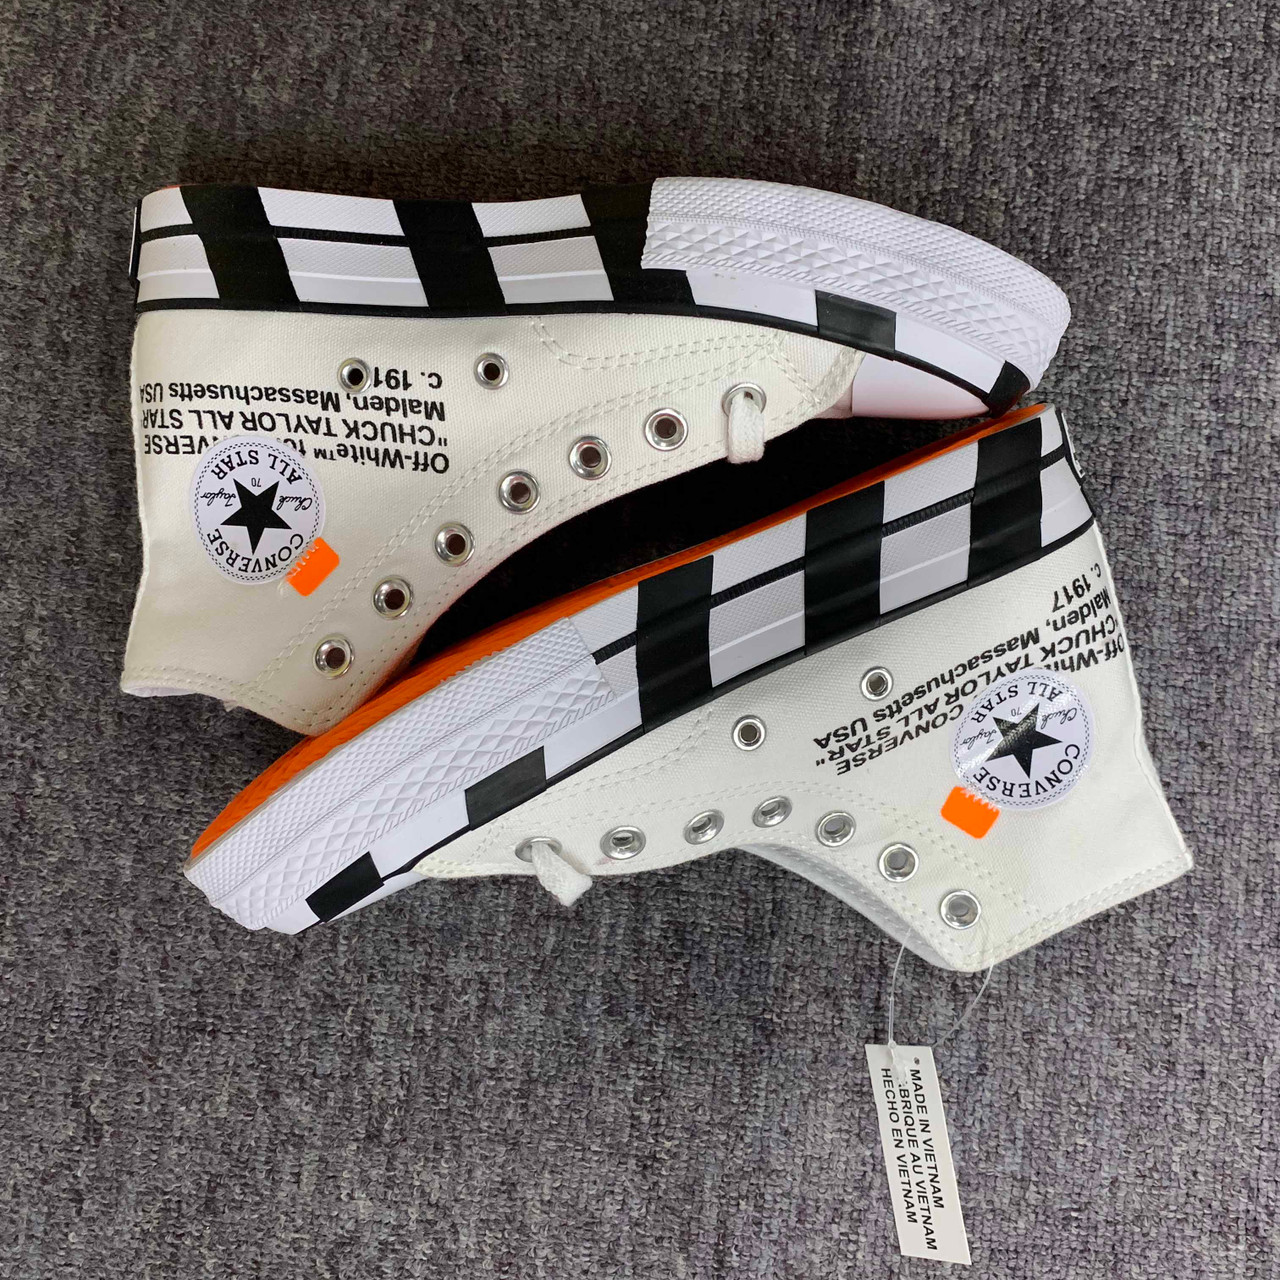 where to buy the best stockX UA High quality replica OFF-WHITE x converse  chuck taylor 2.0 Hypedripz is the best high quality trusted clone replica  fake designer hypebeast seller website 2021